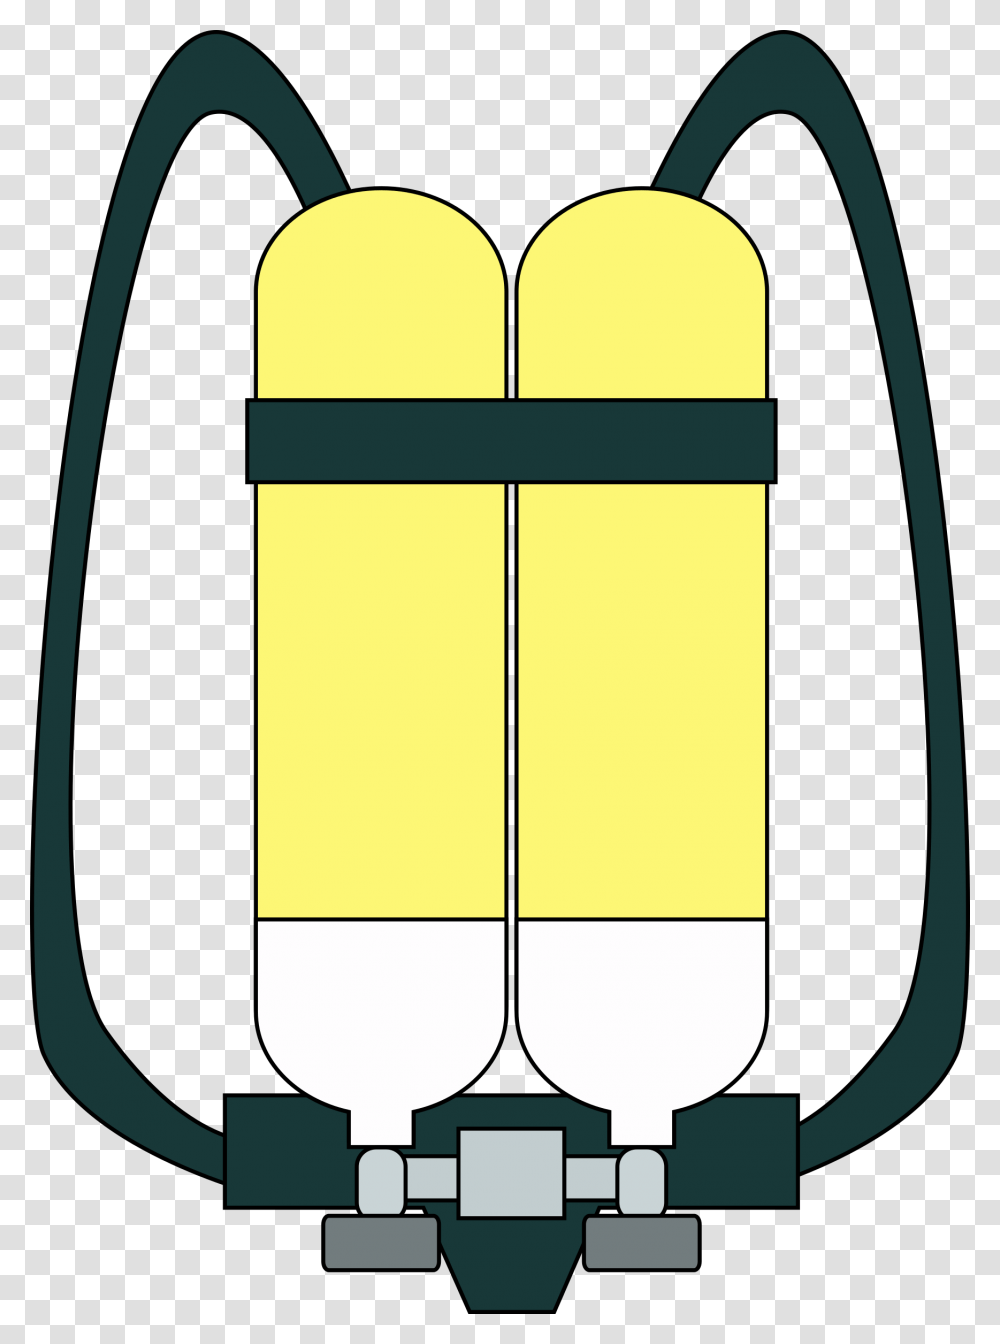 Breathing Apparatus Clip Arts Oxygen Tank For Astronauts, Ice Pop, Medication, Pill, Suspenders Transparent Png